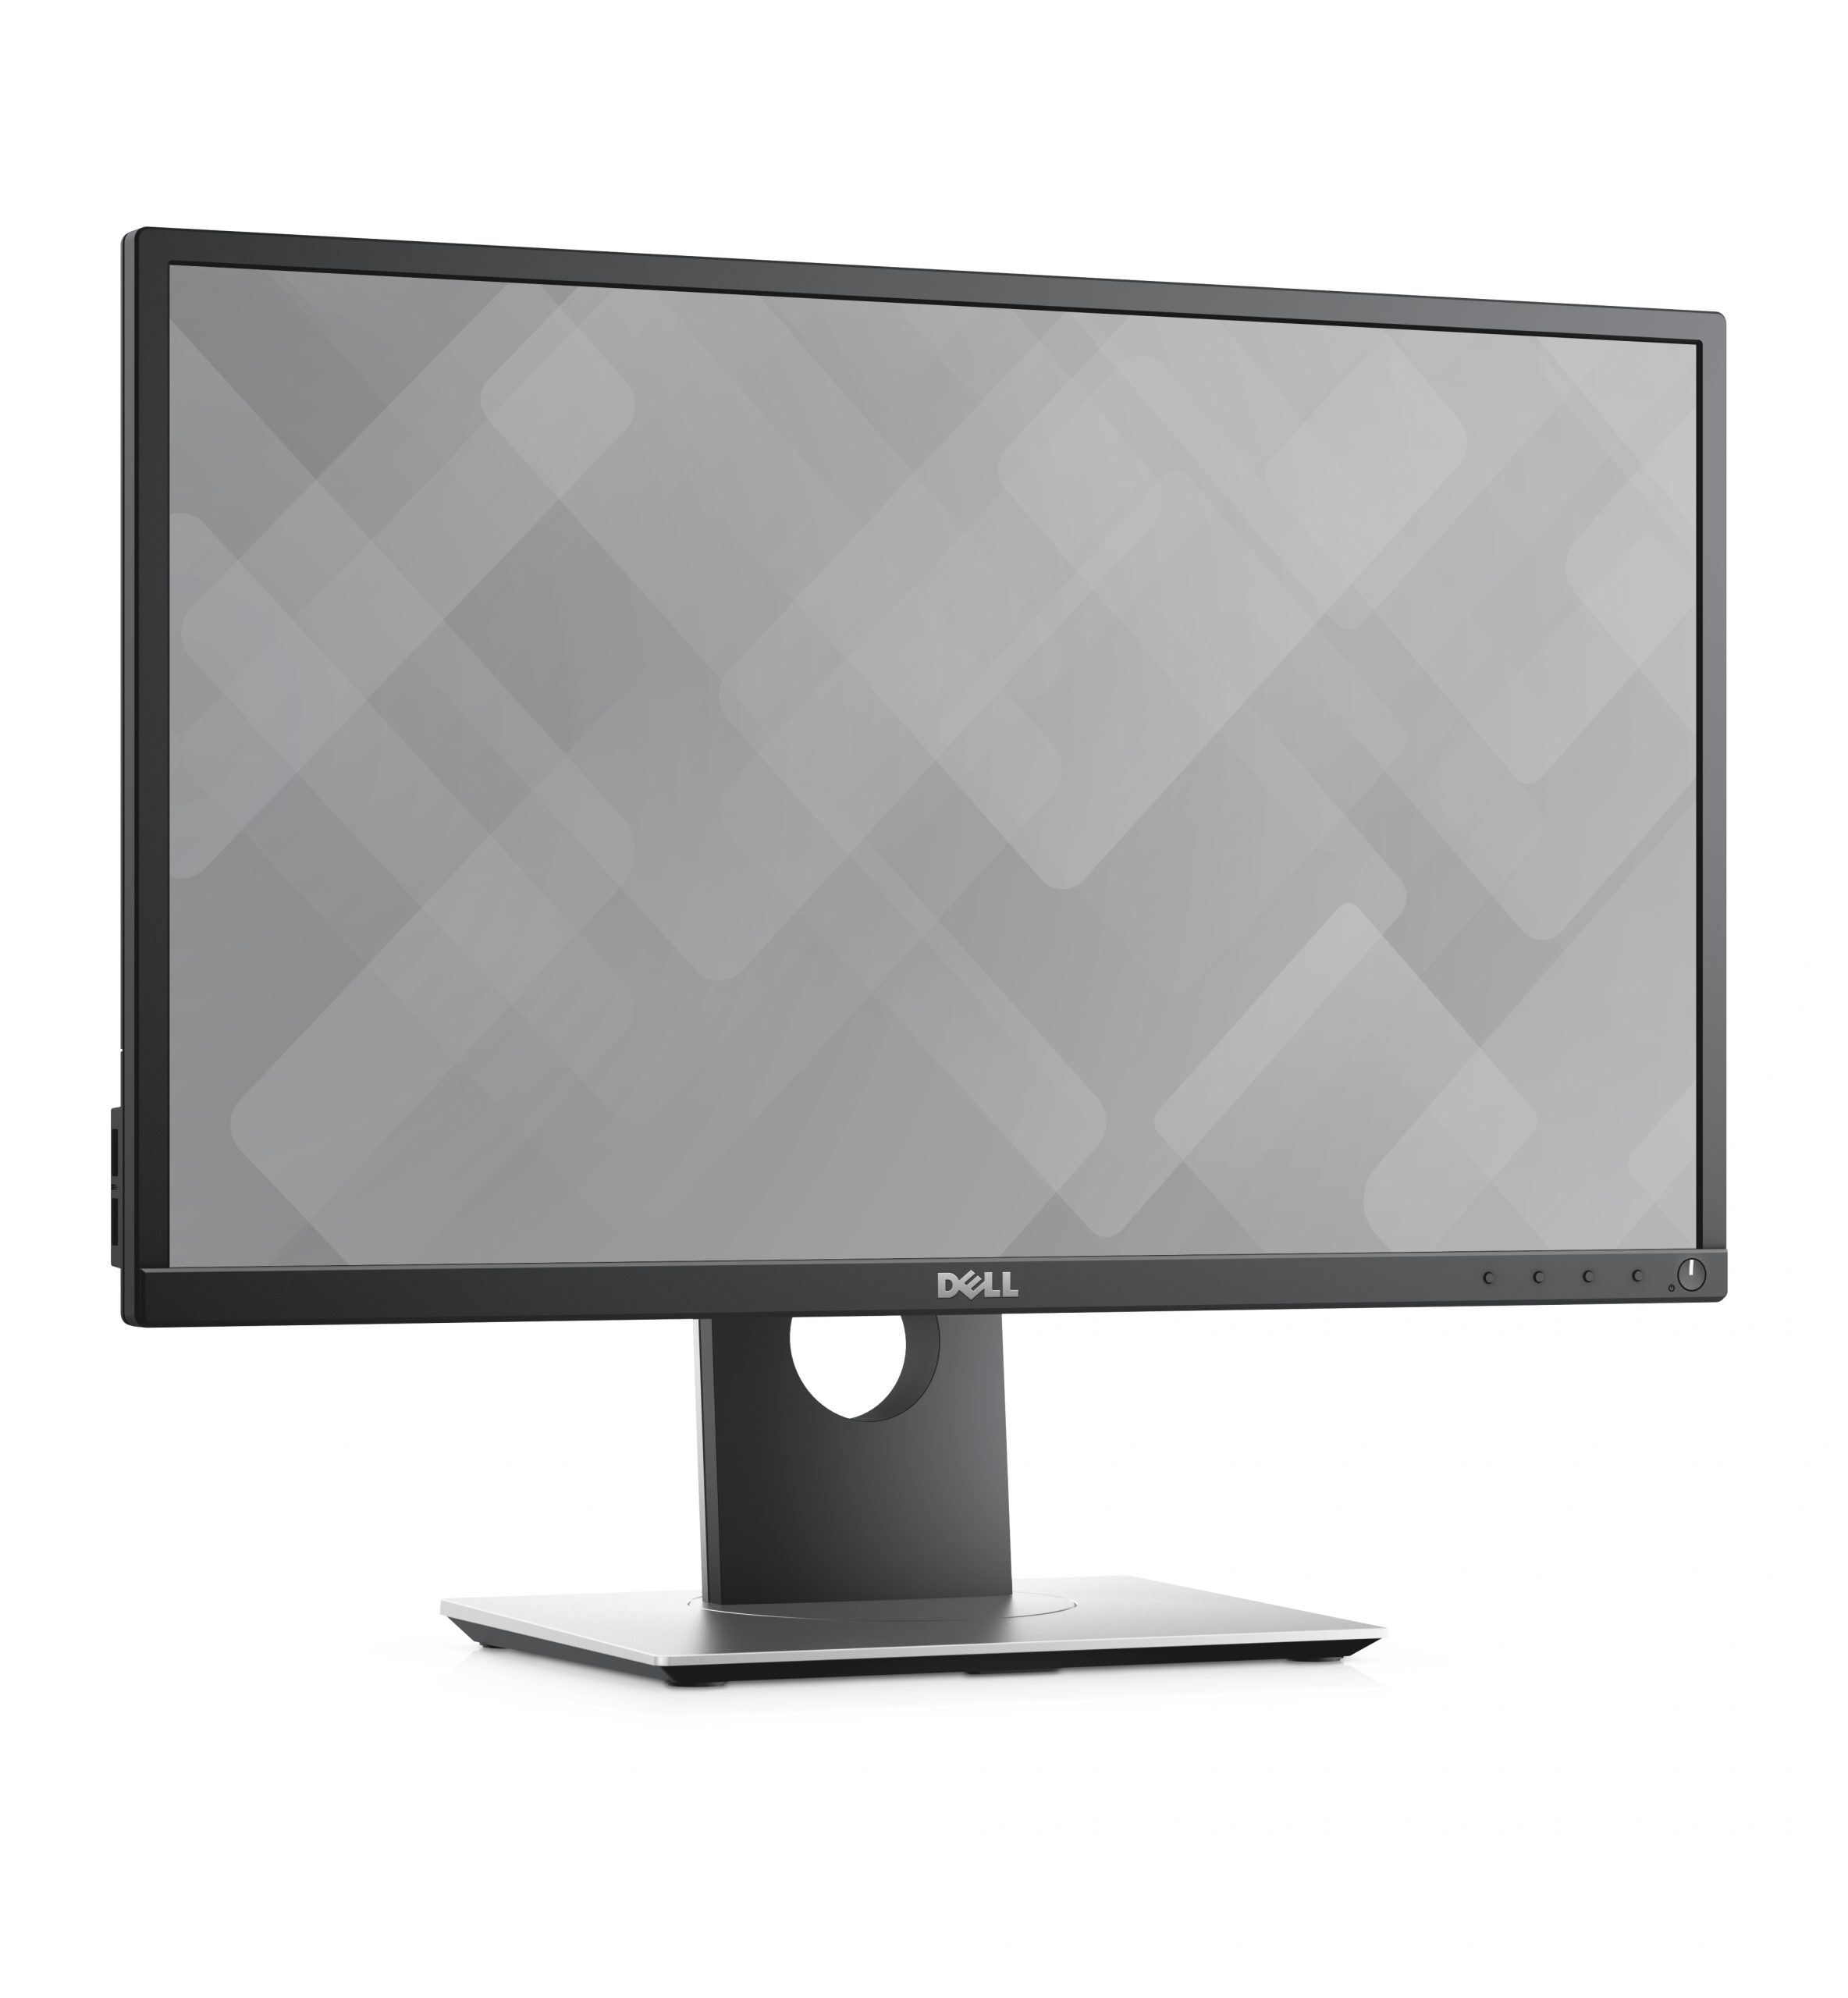 Dell P2317H Monitor LED IPS 23